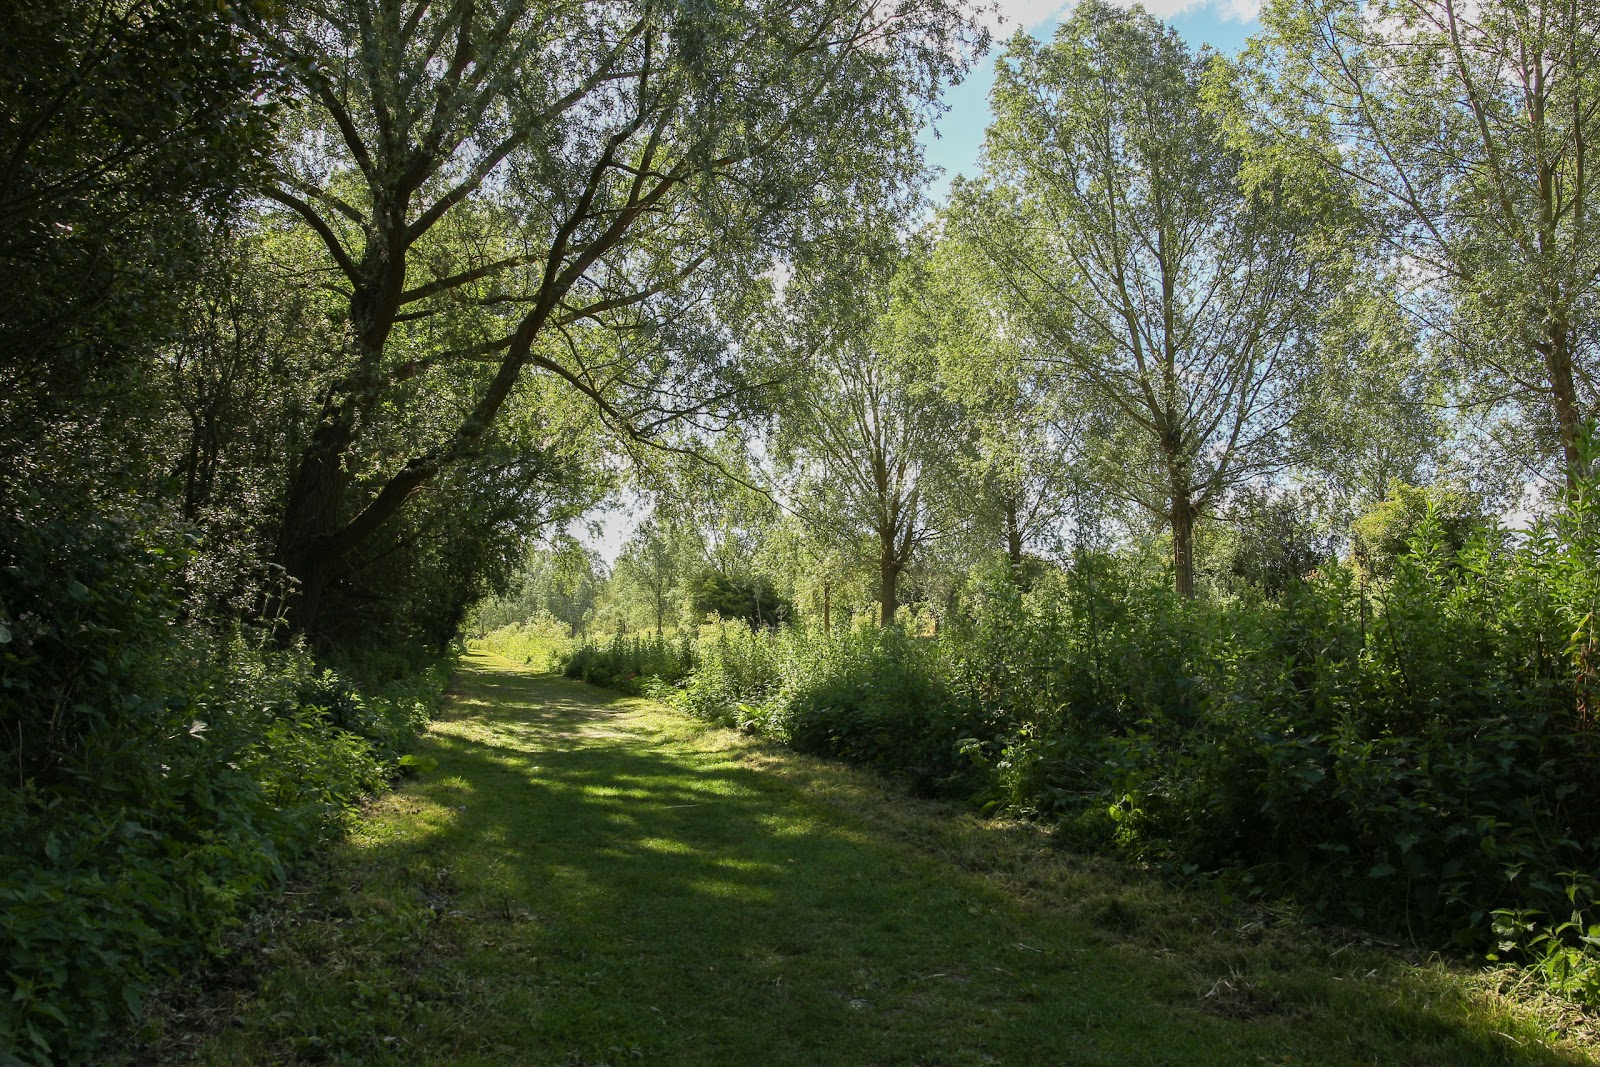 https://whatremovals.co.uk/wp-content/uploads/2022/02/Whetmead Nature Reserve-300x200.jpeg